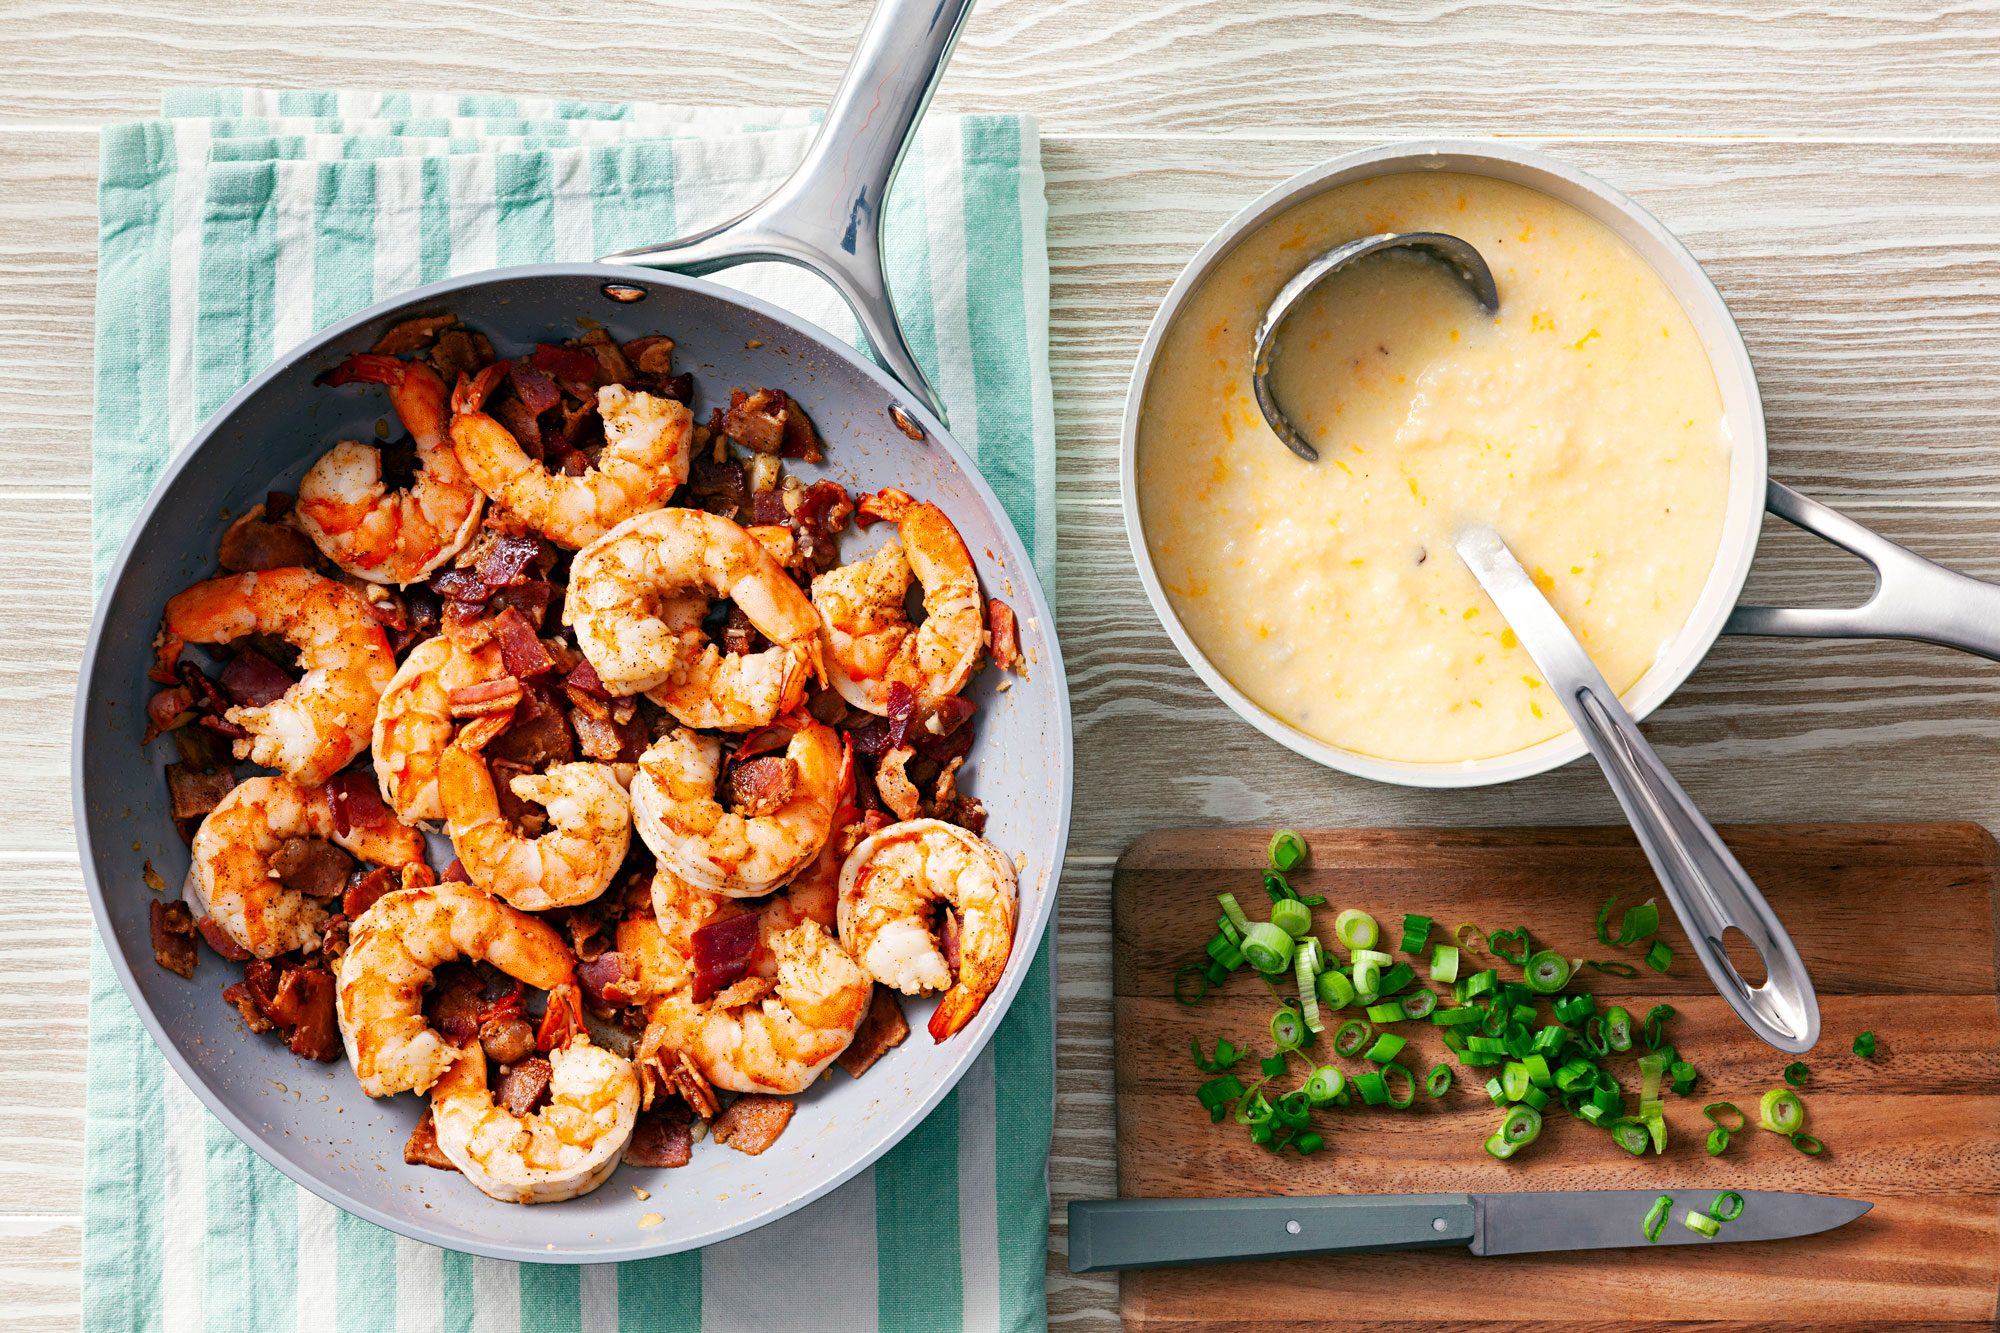 A pan of Southern Shrimp and Grits, a classic dish featuring succulent shrimp served with creamy grits